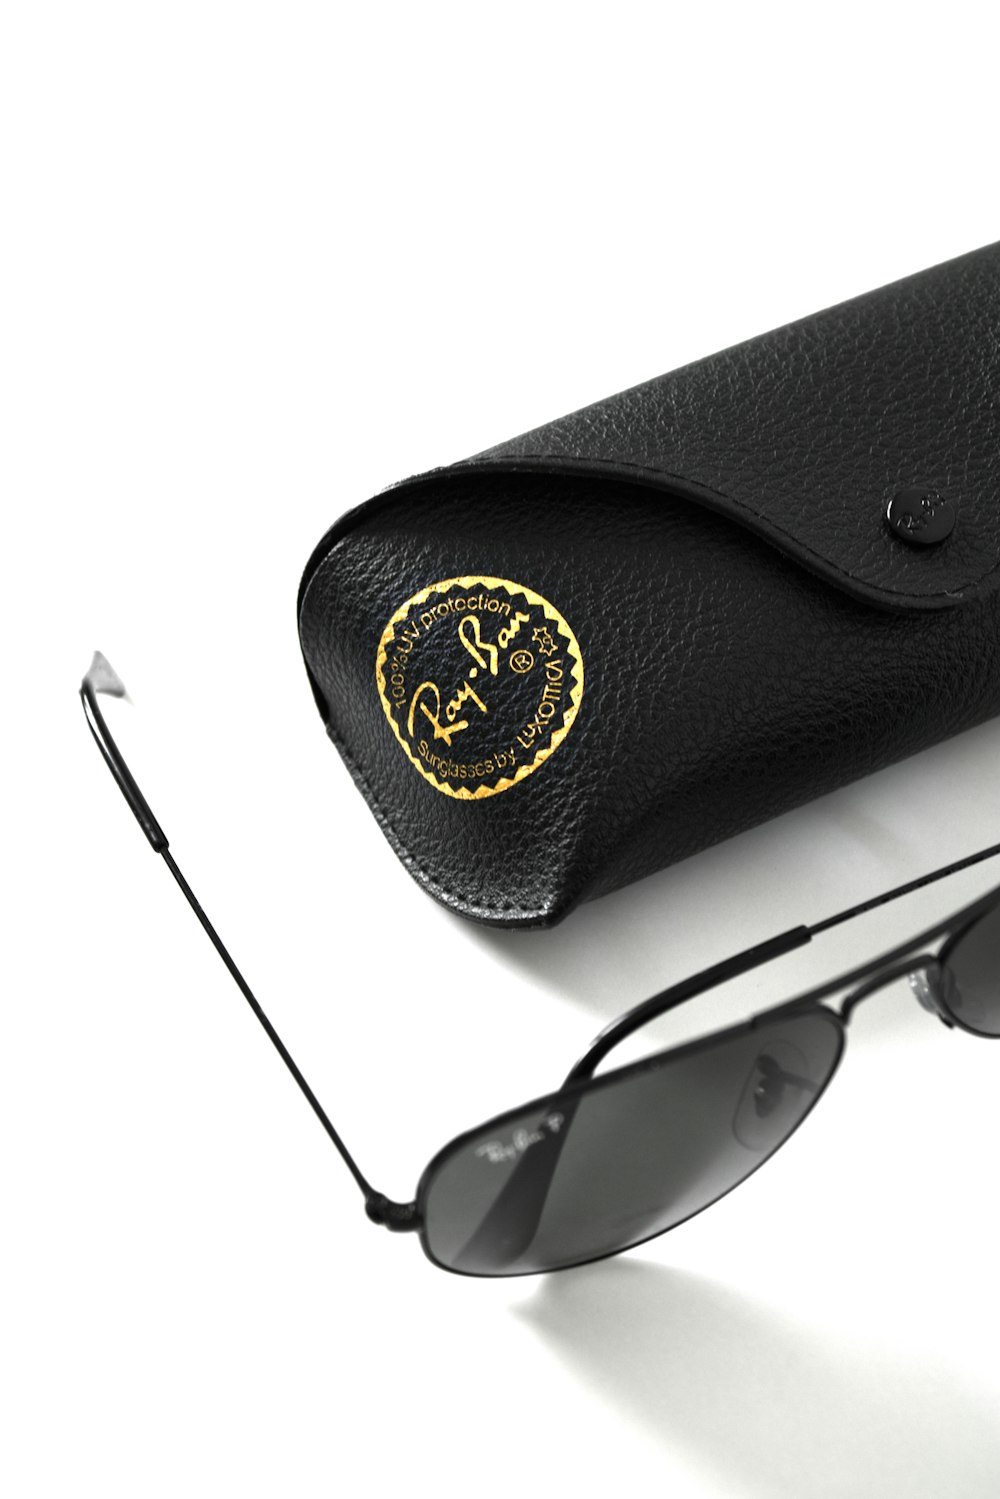 black sunglasses on black leather pouch